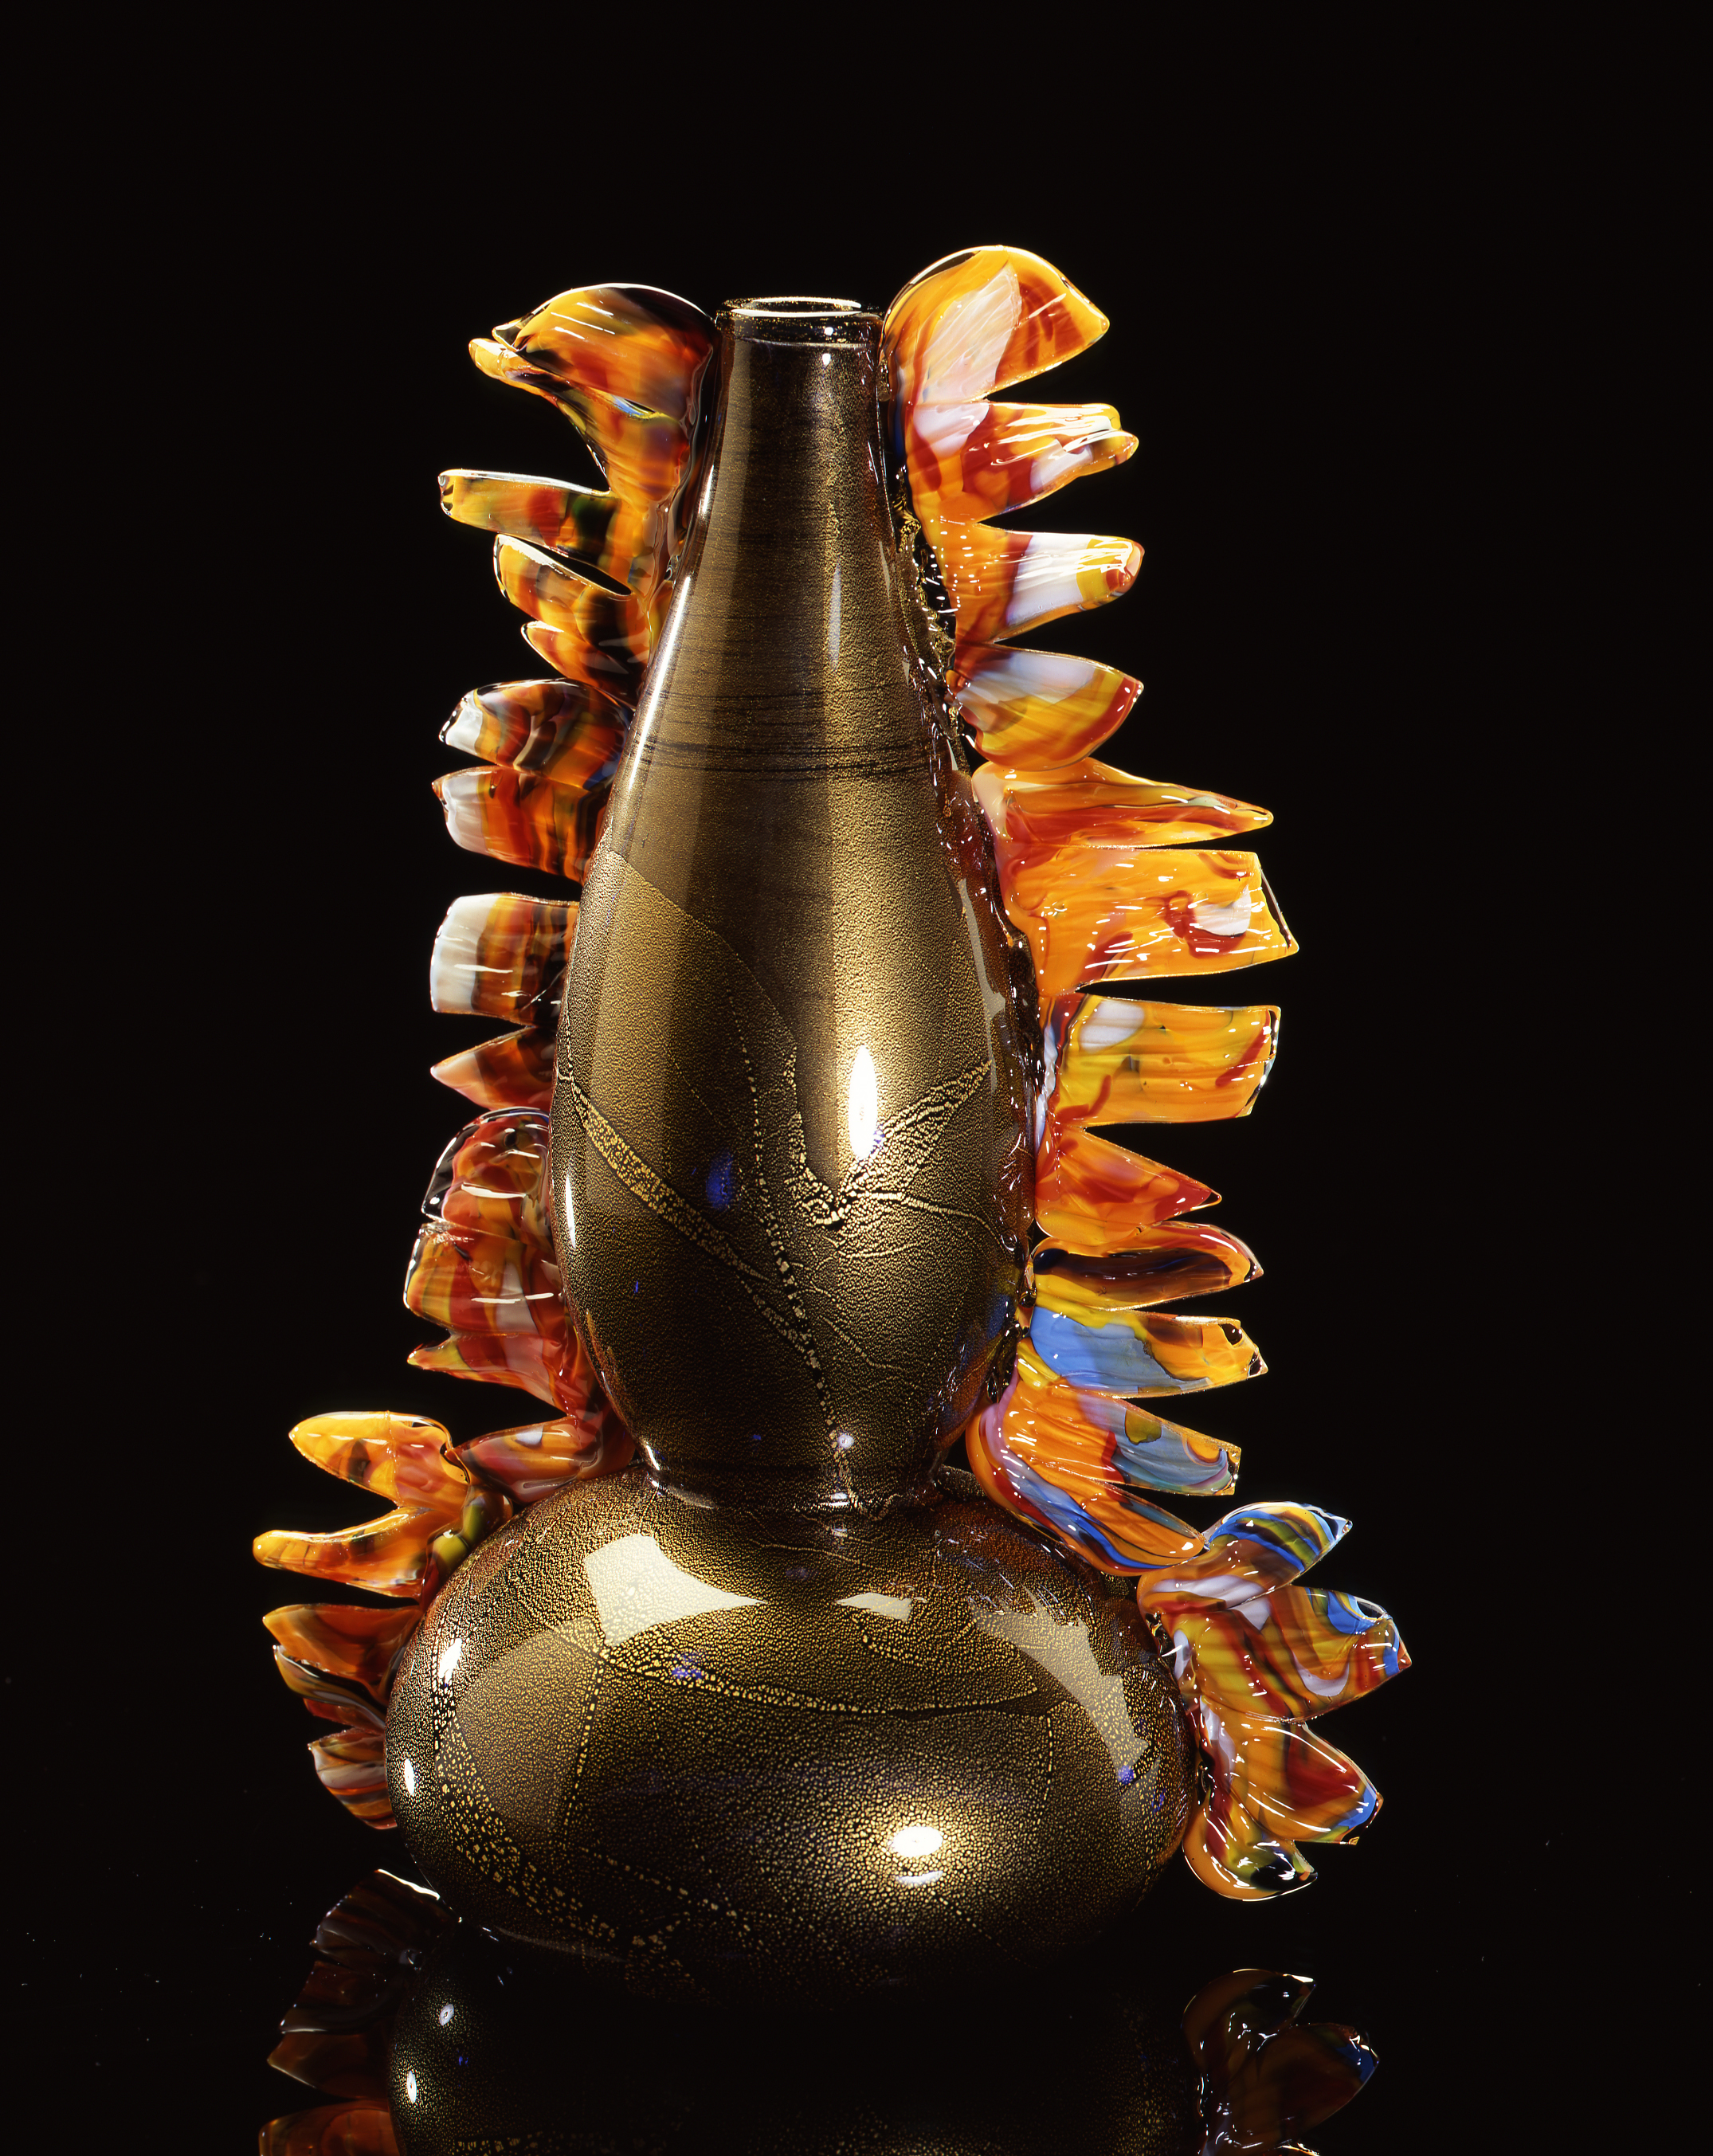  Dale Chihuly,&nbsp; Gold over Violet Piccolo Venetian with Marbled Orange Leaves &nbsp;(1994, glass, 10 x 7 x 5 inches) 